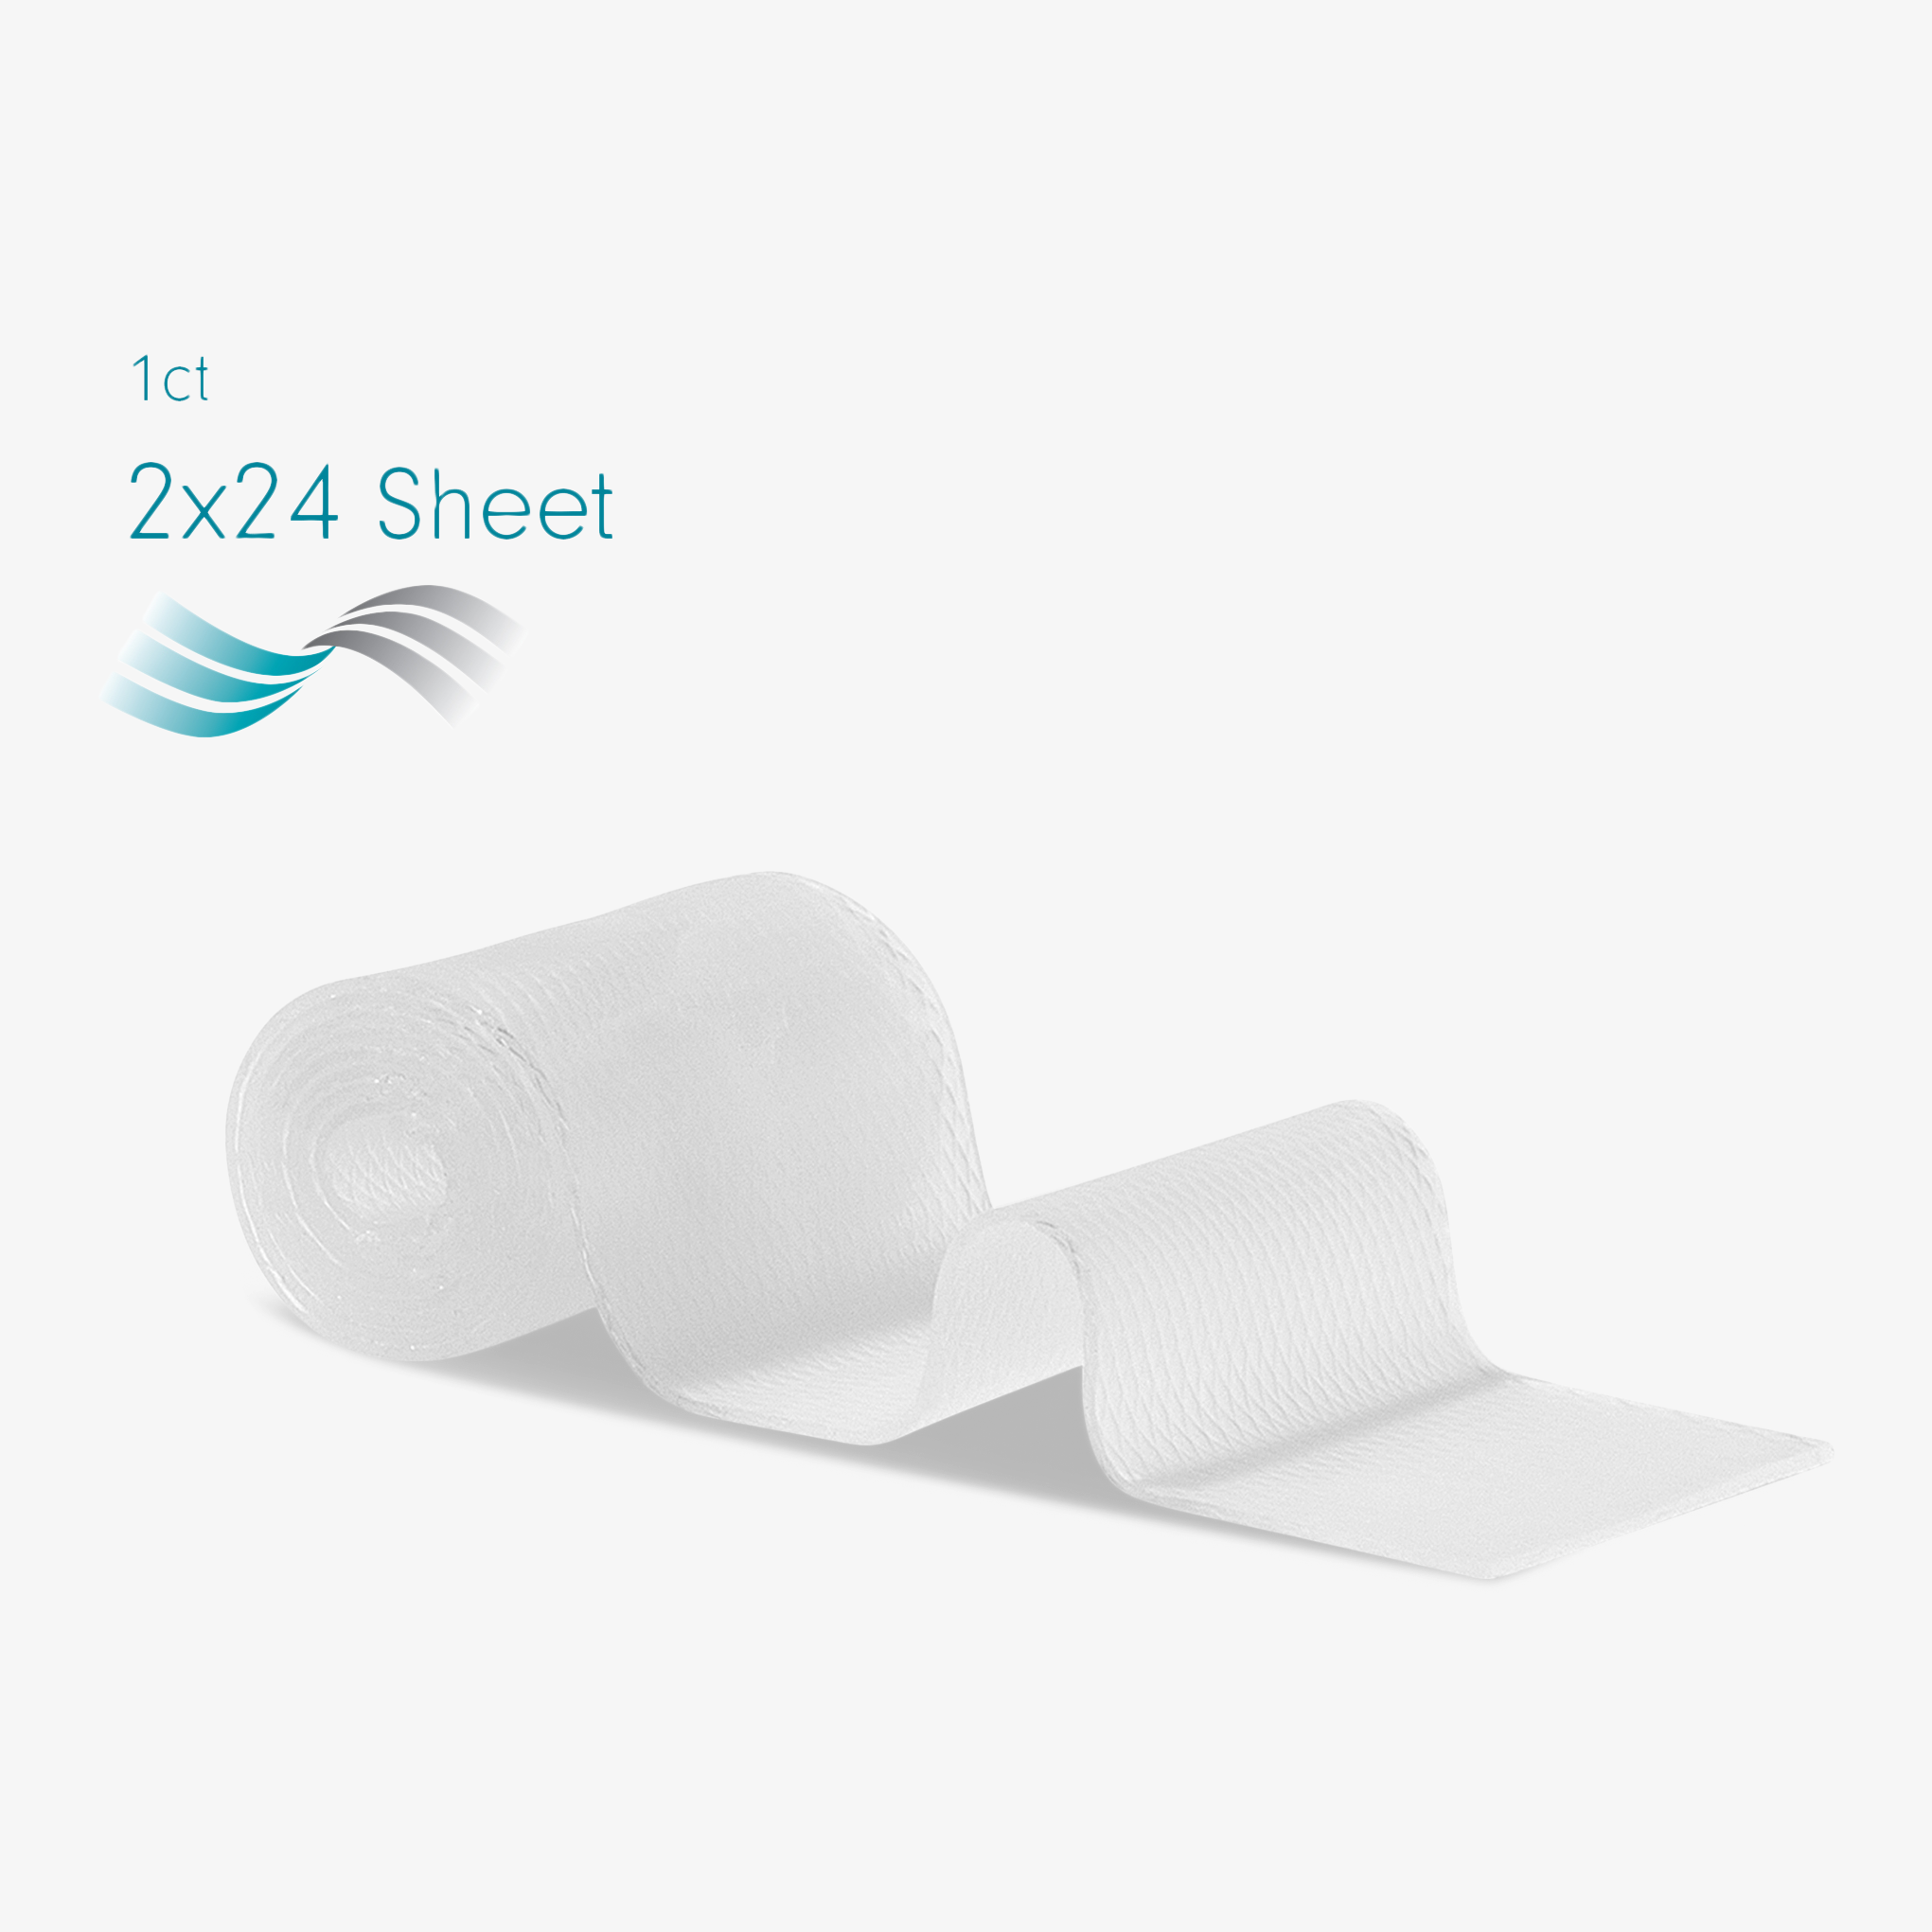 Advanced Medical-Grade Silicone 2" x 24" Roll 1 count| clear